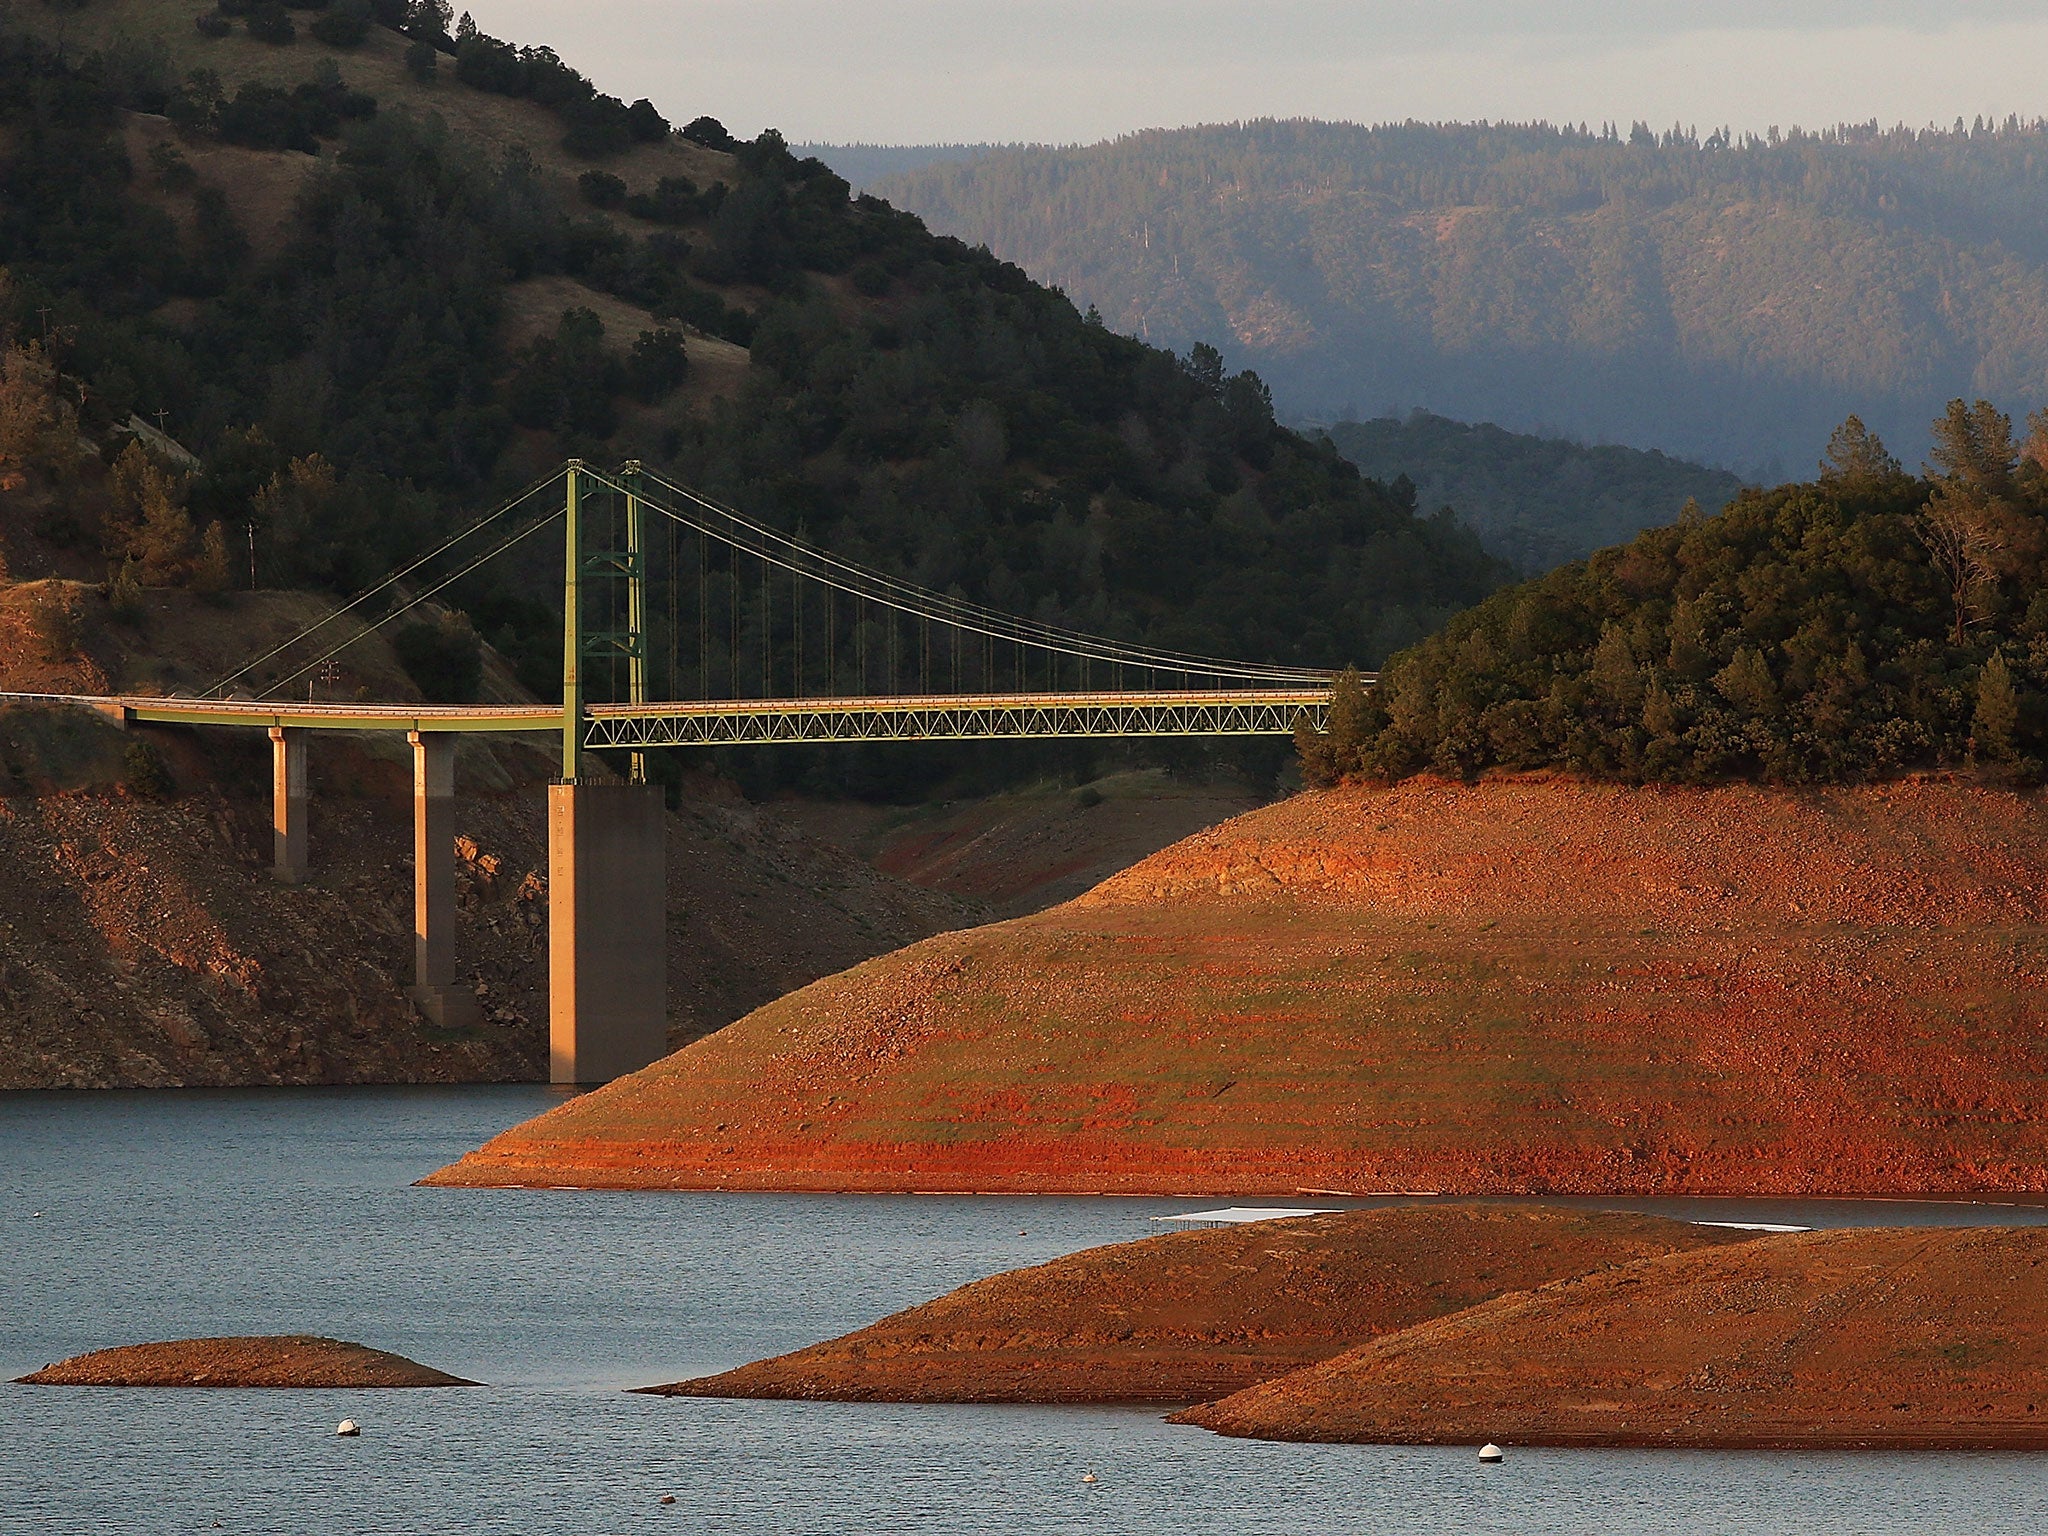 Reservoirs such as Lake Oroville in northern California have been replenished by a wet winter